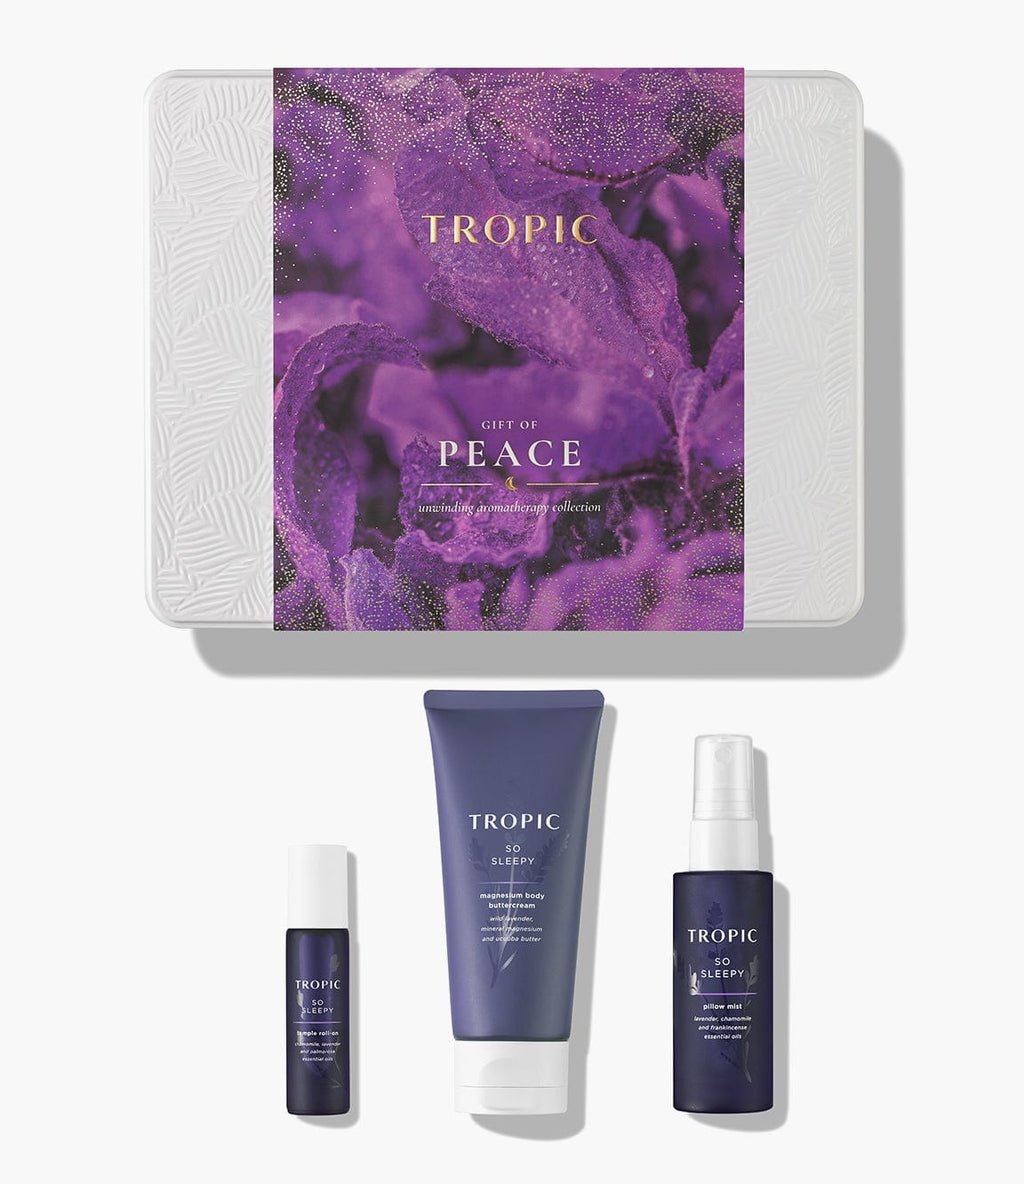 GIFT OF PEACE unwinding aromatherapy collection 1F2@1116 TROPIC so B TROPIC o 